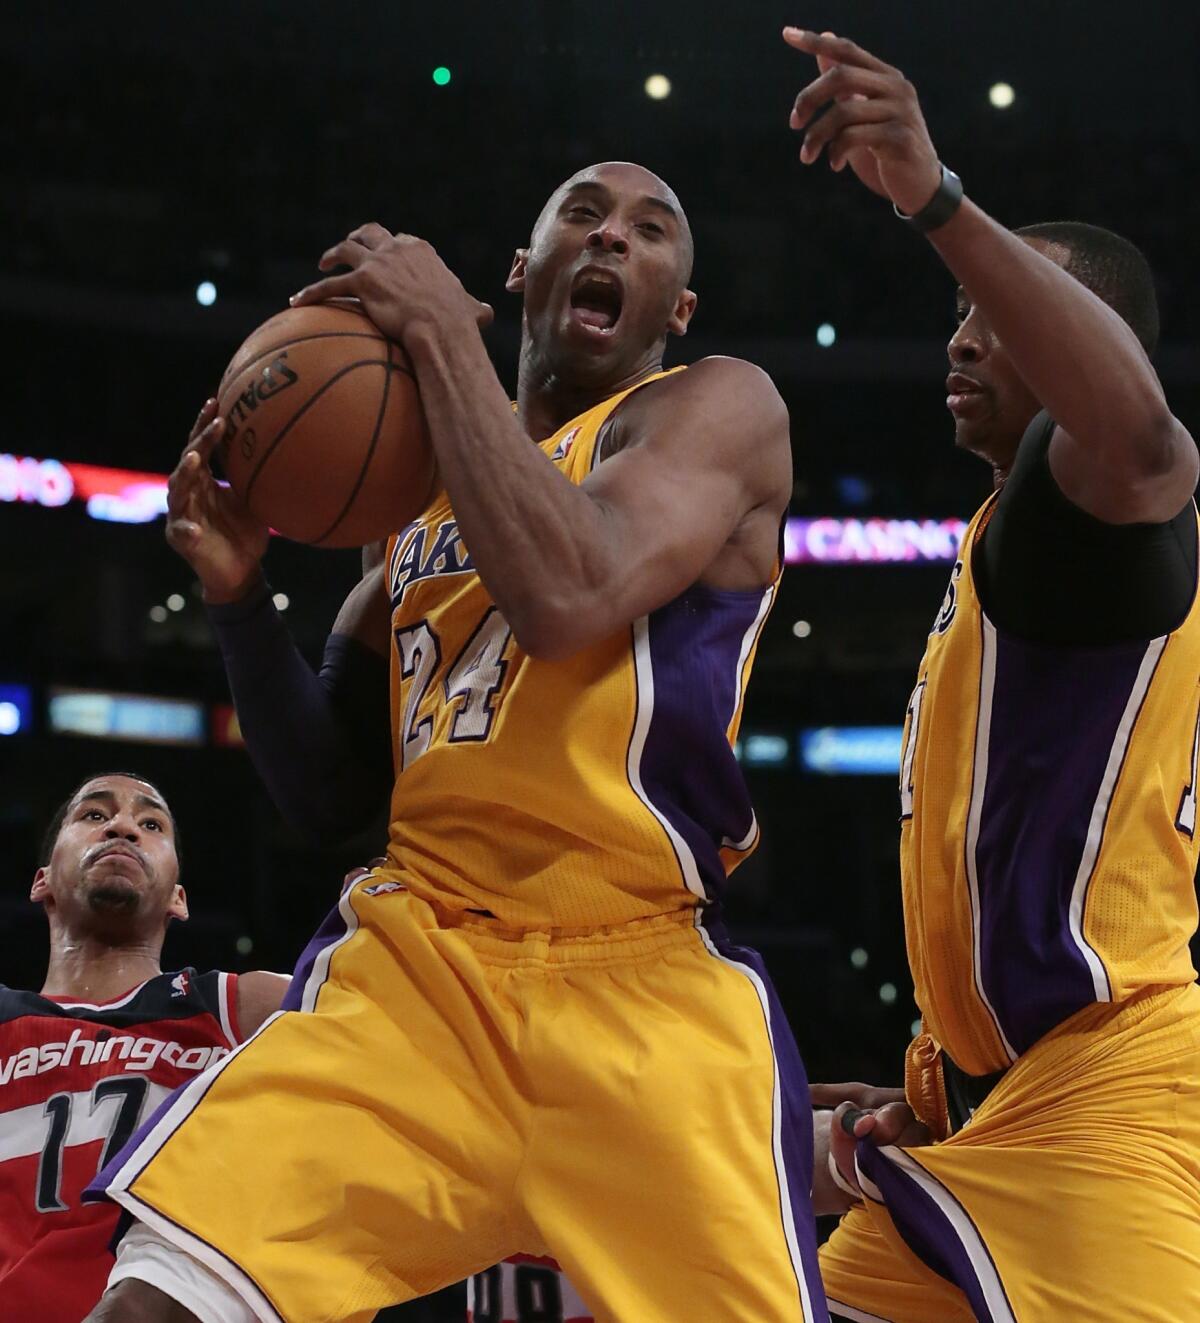 Lakers guard Kobe Bryant pulls down a rebound in front of teammate Dwight Howard during a game against the Wizards this season.